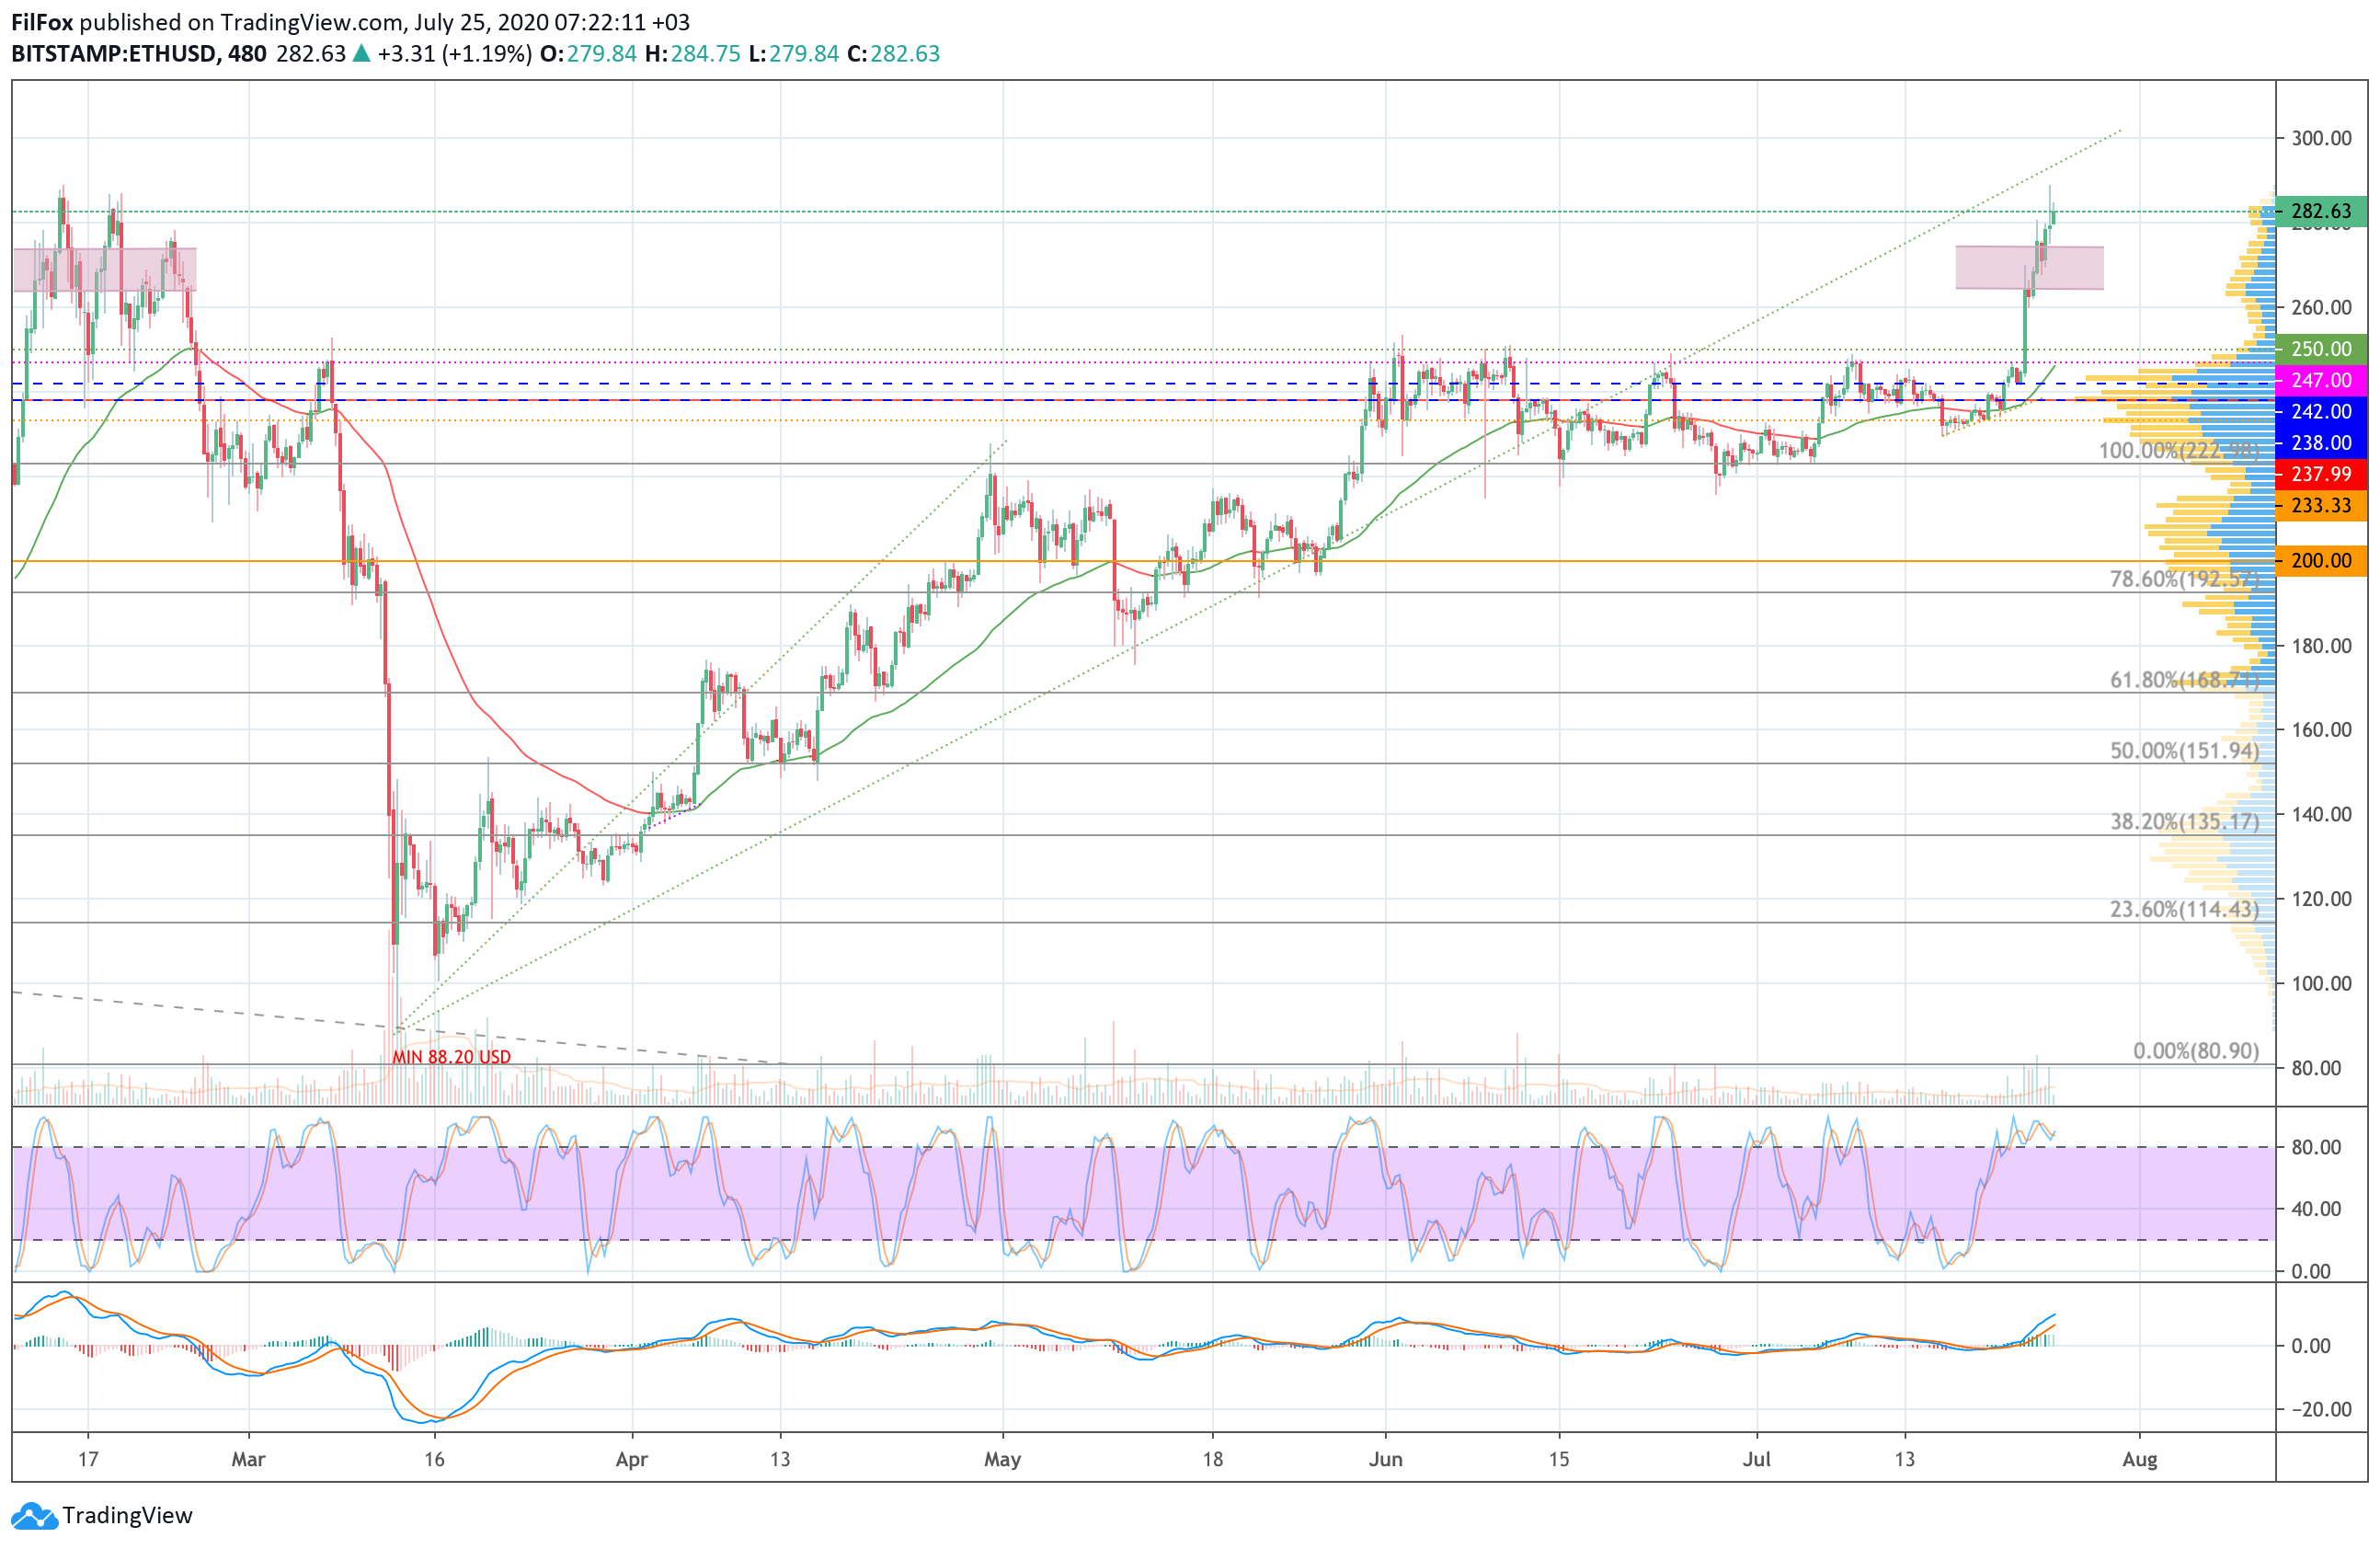 Analysis of prices for Bitcoin, Ethereum, XRP for 07/25/2020